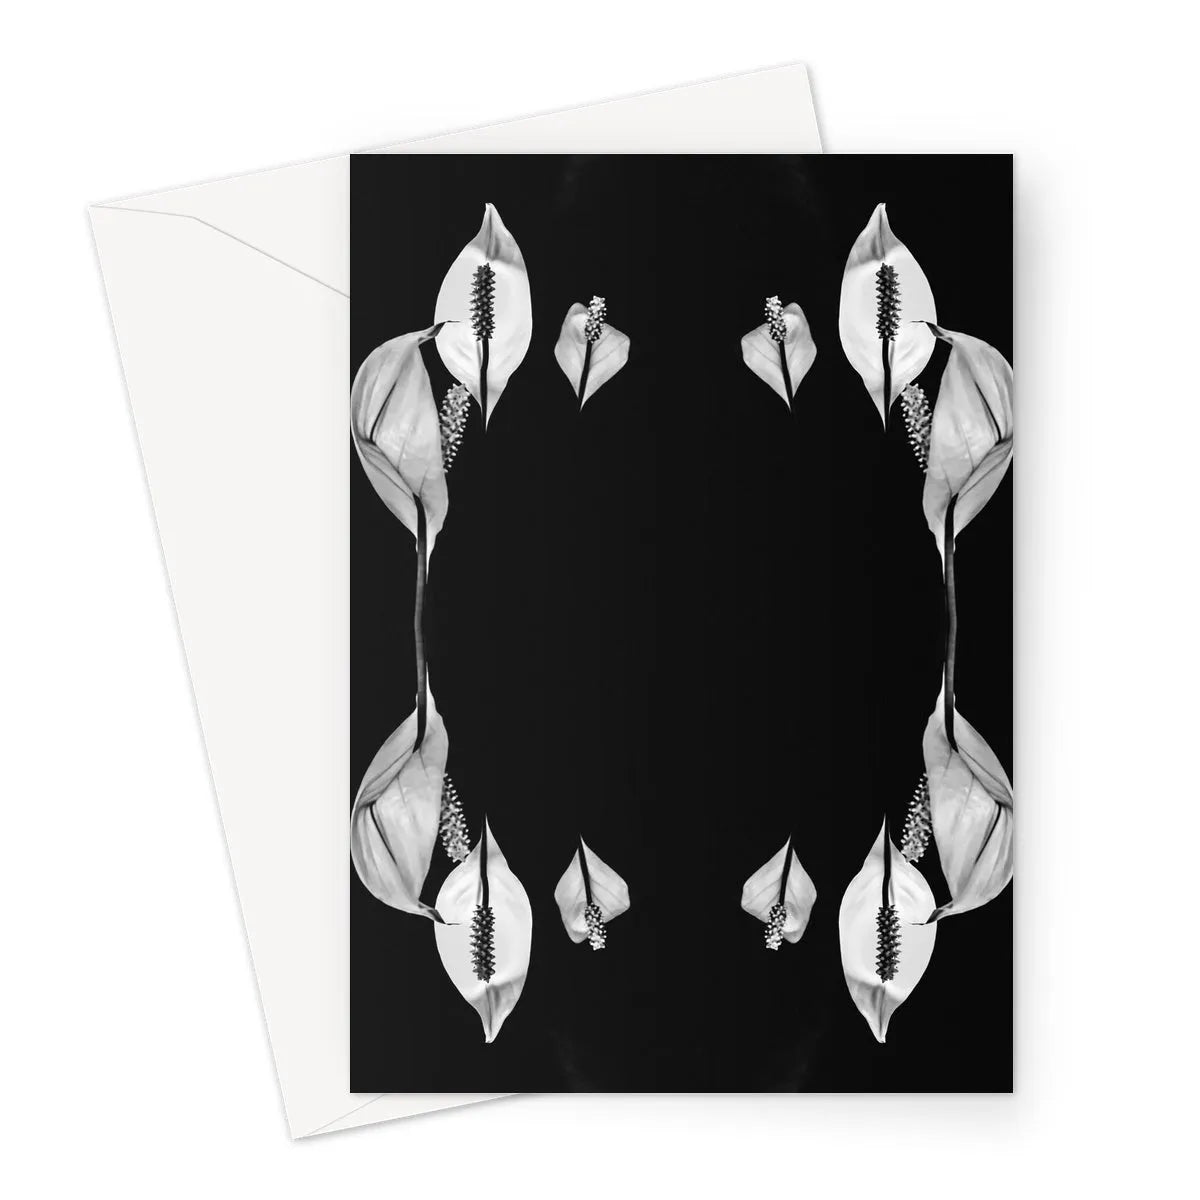 Pearly Whites Greeting Card - A5 Portrait / 1 Card - Greeting & Note Cards - Aesthetic Art